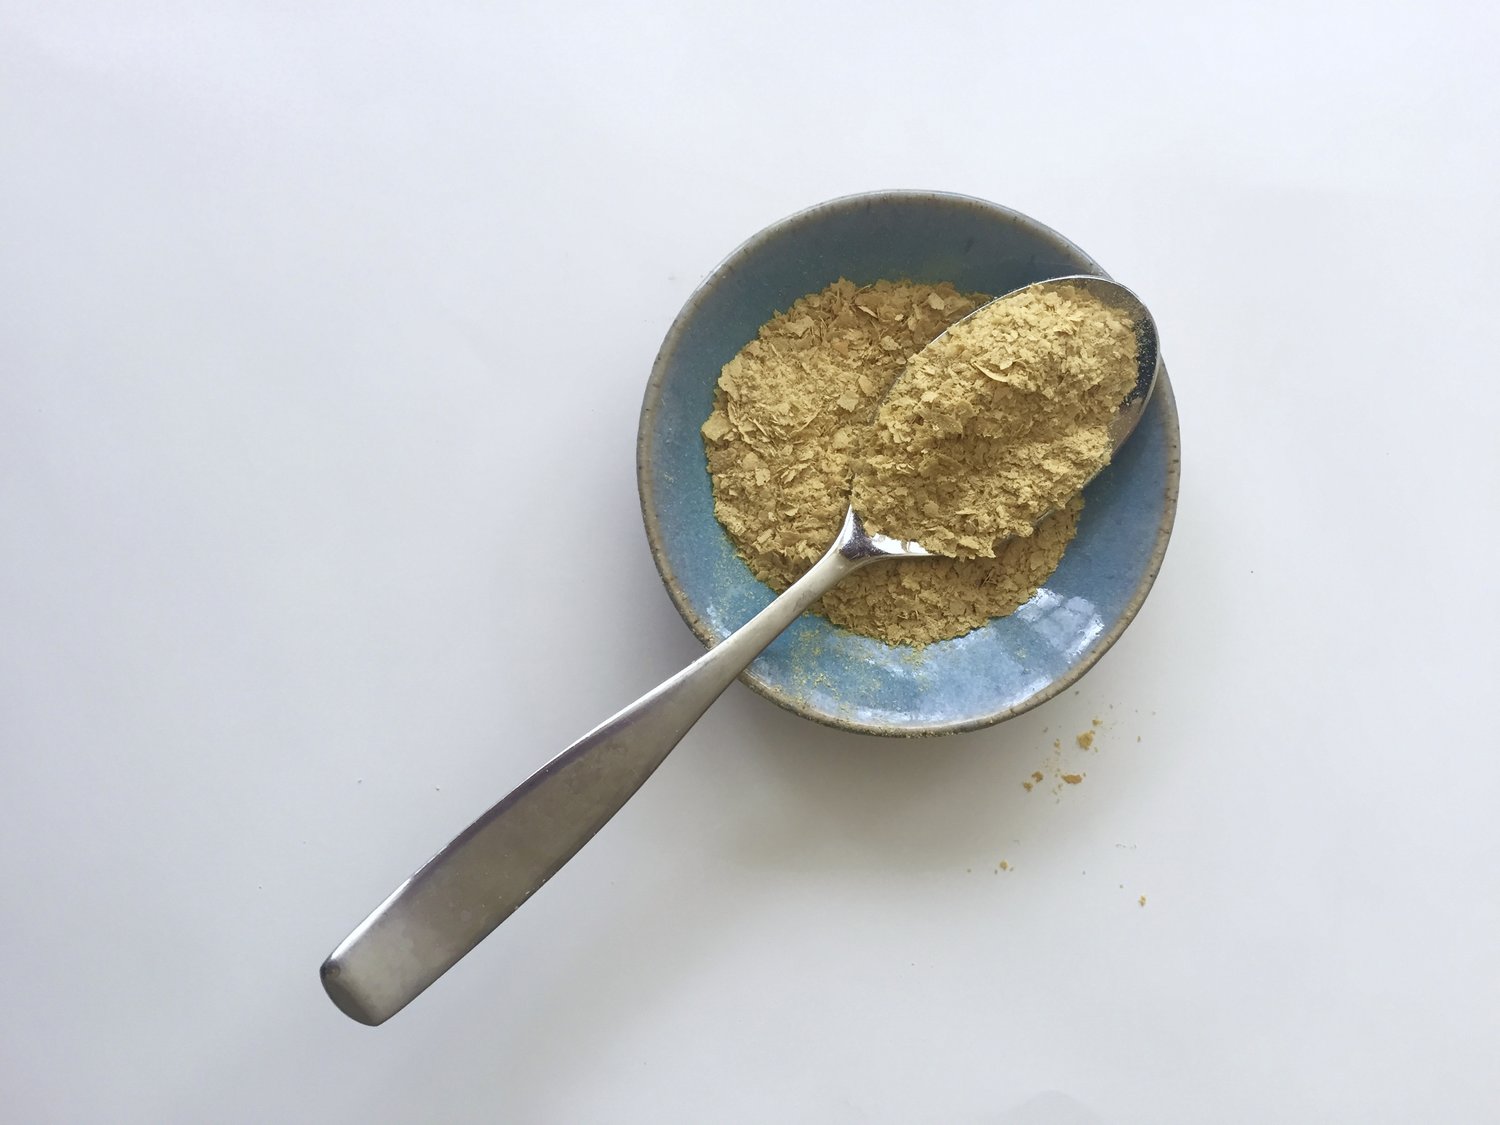 All You Ever Wanted to Know About Nutritional Yeast and Its Health Benefits